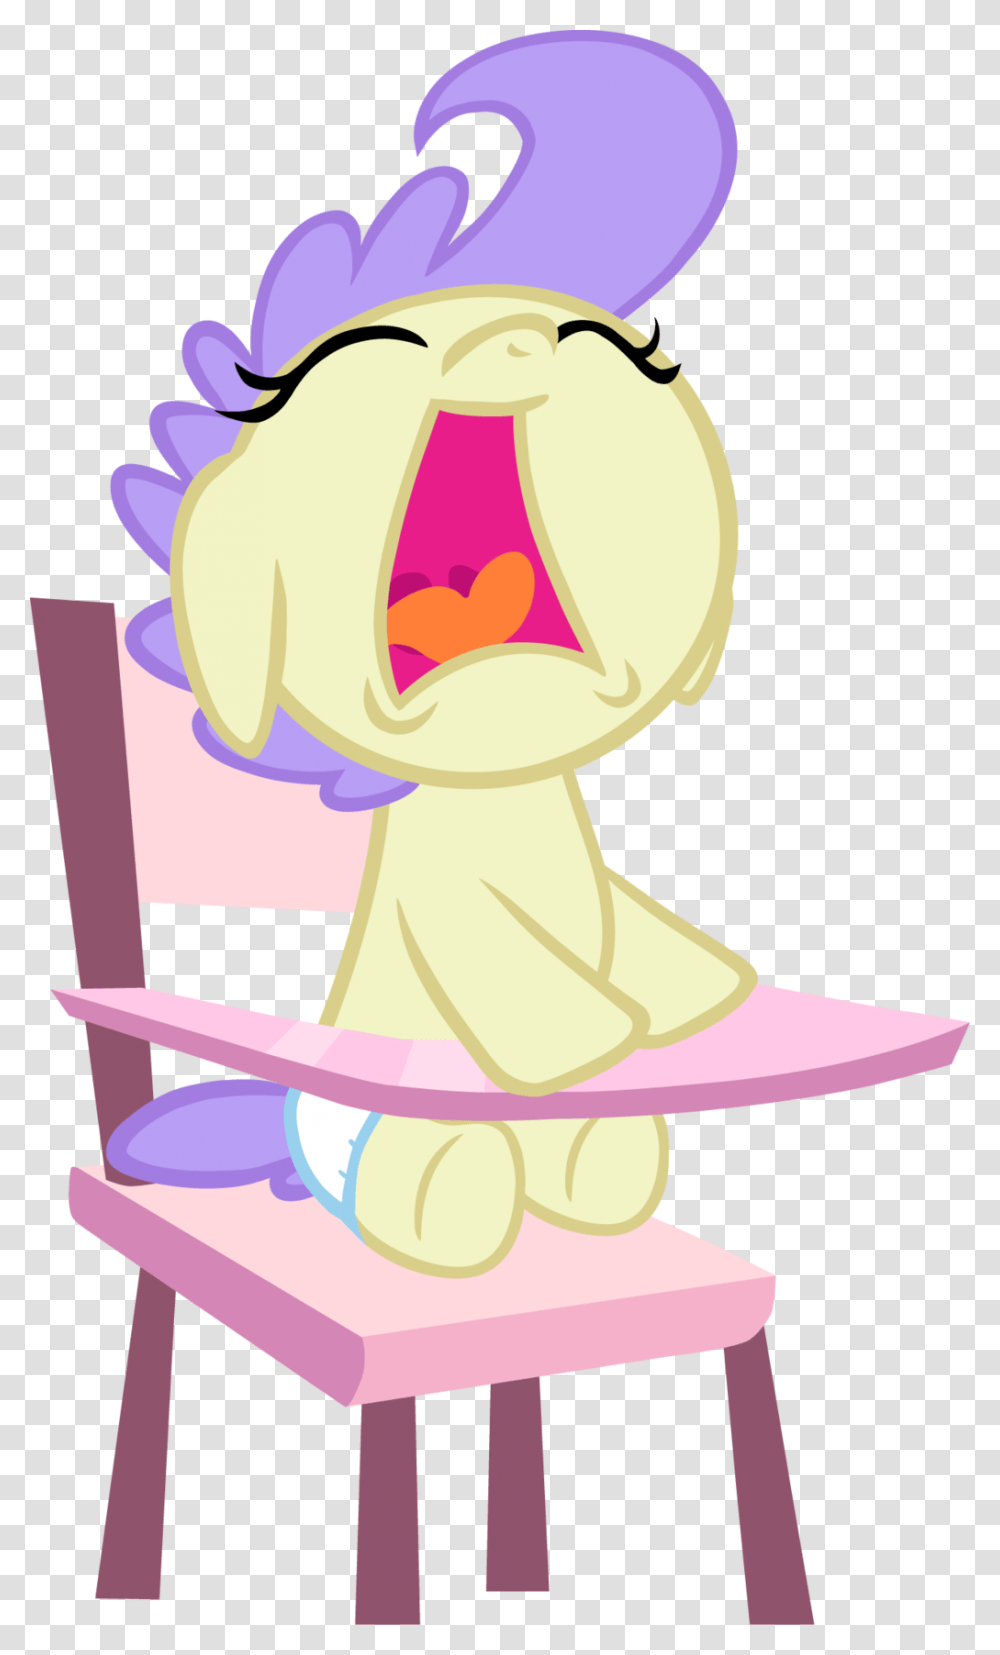 Baby Baby Pony Cream Puff Crying Mlp Flurry Heart And Cream Puff, Outdoors, Label Transparent Png